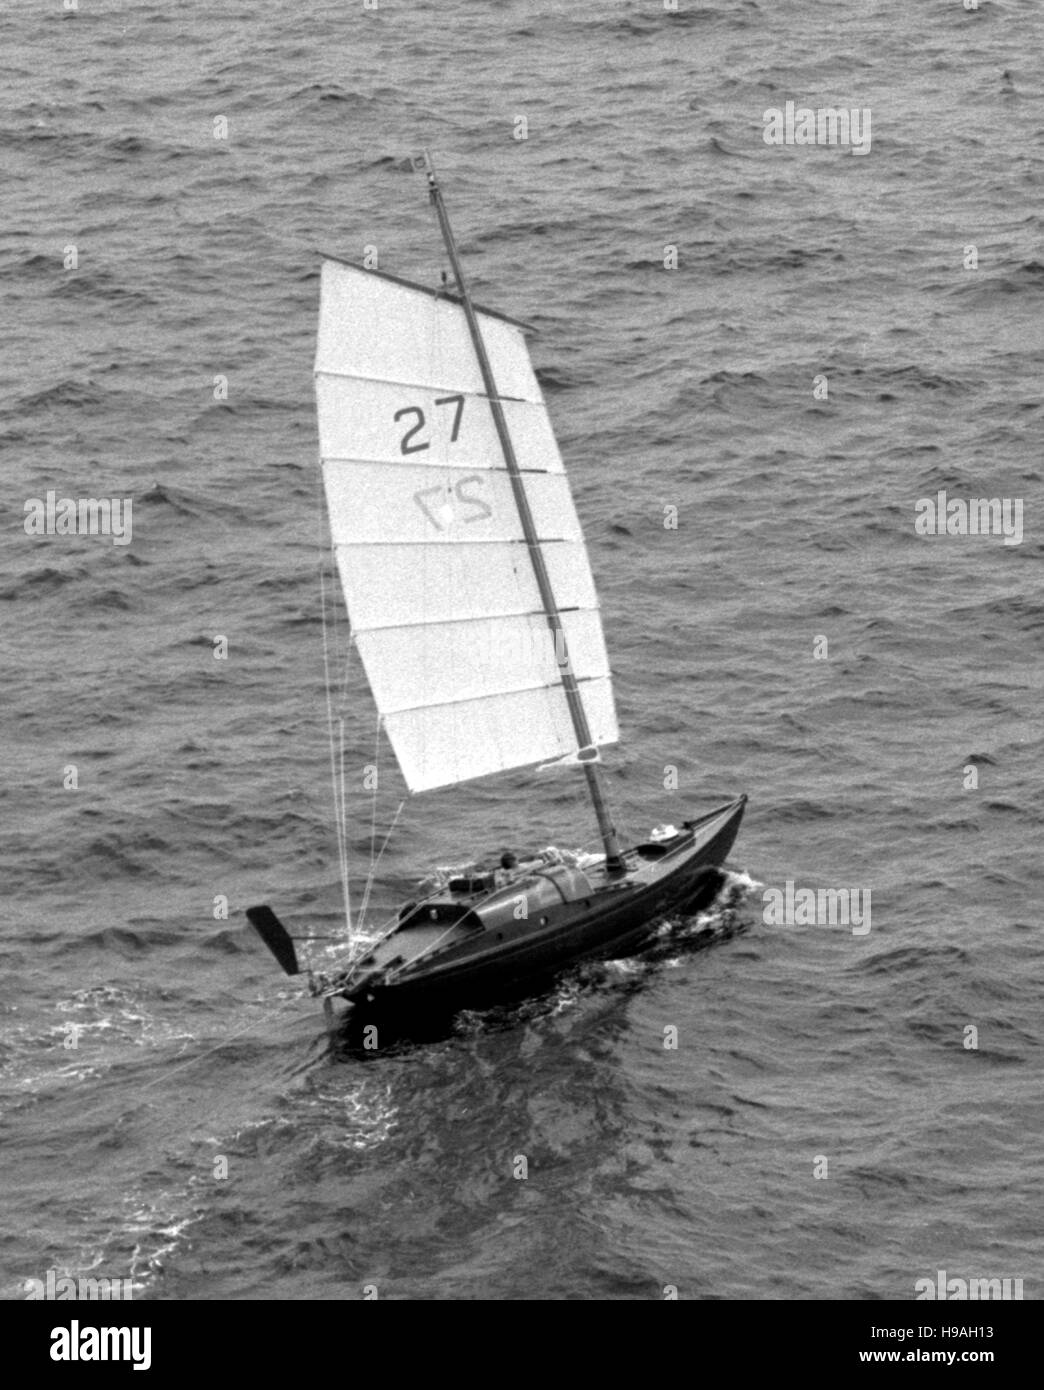 AJAX NEWS PHOTOS. 7TH JUNE, 1980. PLYMOUTH,ENGLAND. - OSTAR START - MIKE RITCHIE SAILING JESTER, ONE OF THE SMALLEST YACHTS IN THE RACE TO NEWPORT R.I.  PHOTO:JONATHAN EASTLAND/AJAX REF:800706 16 Stock Photo